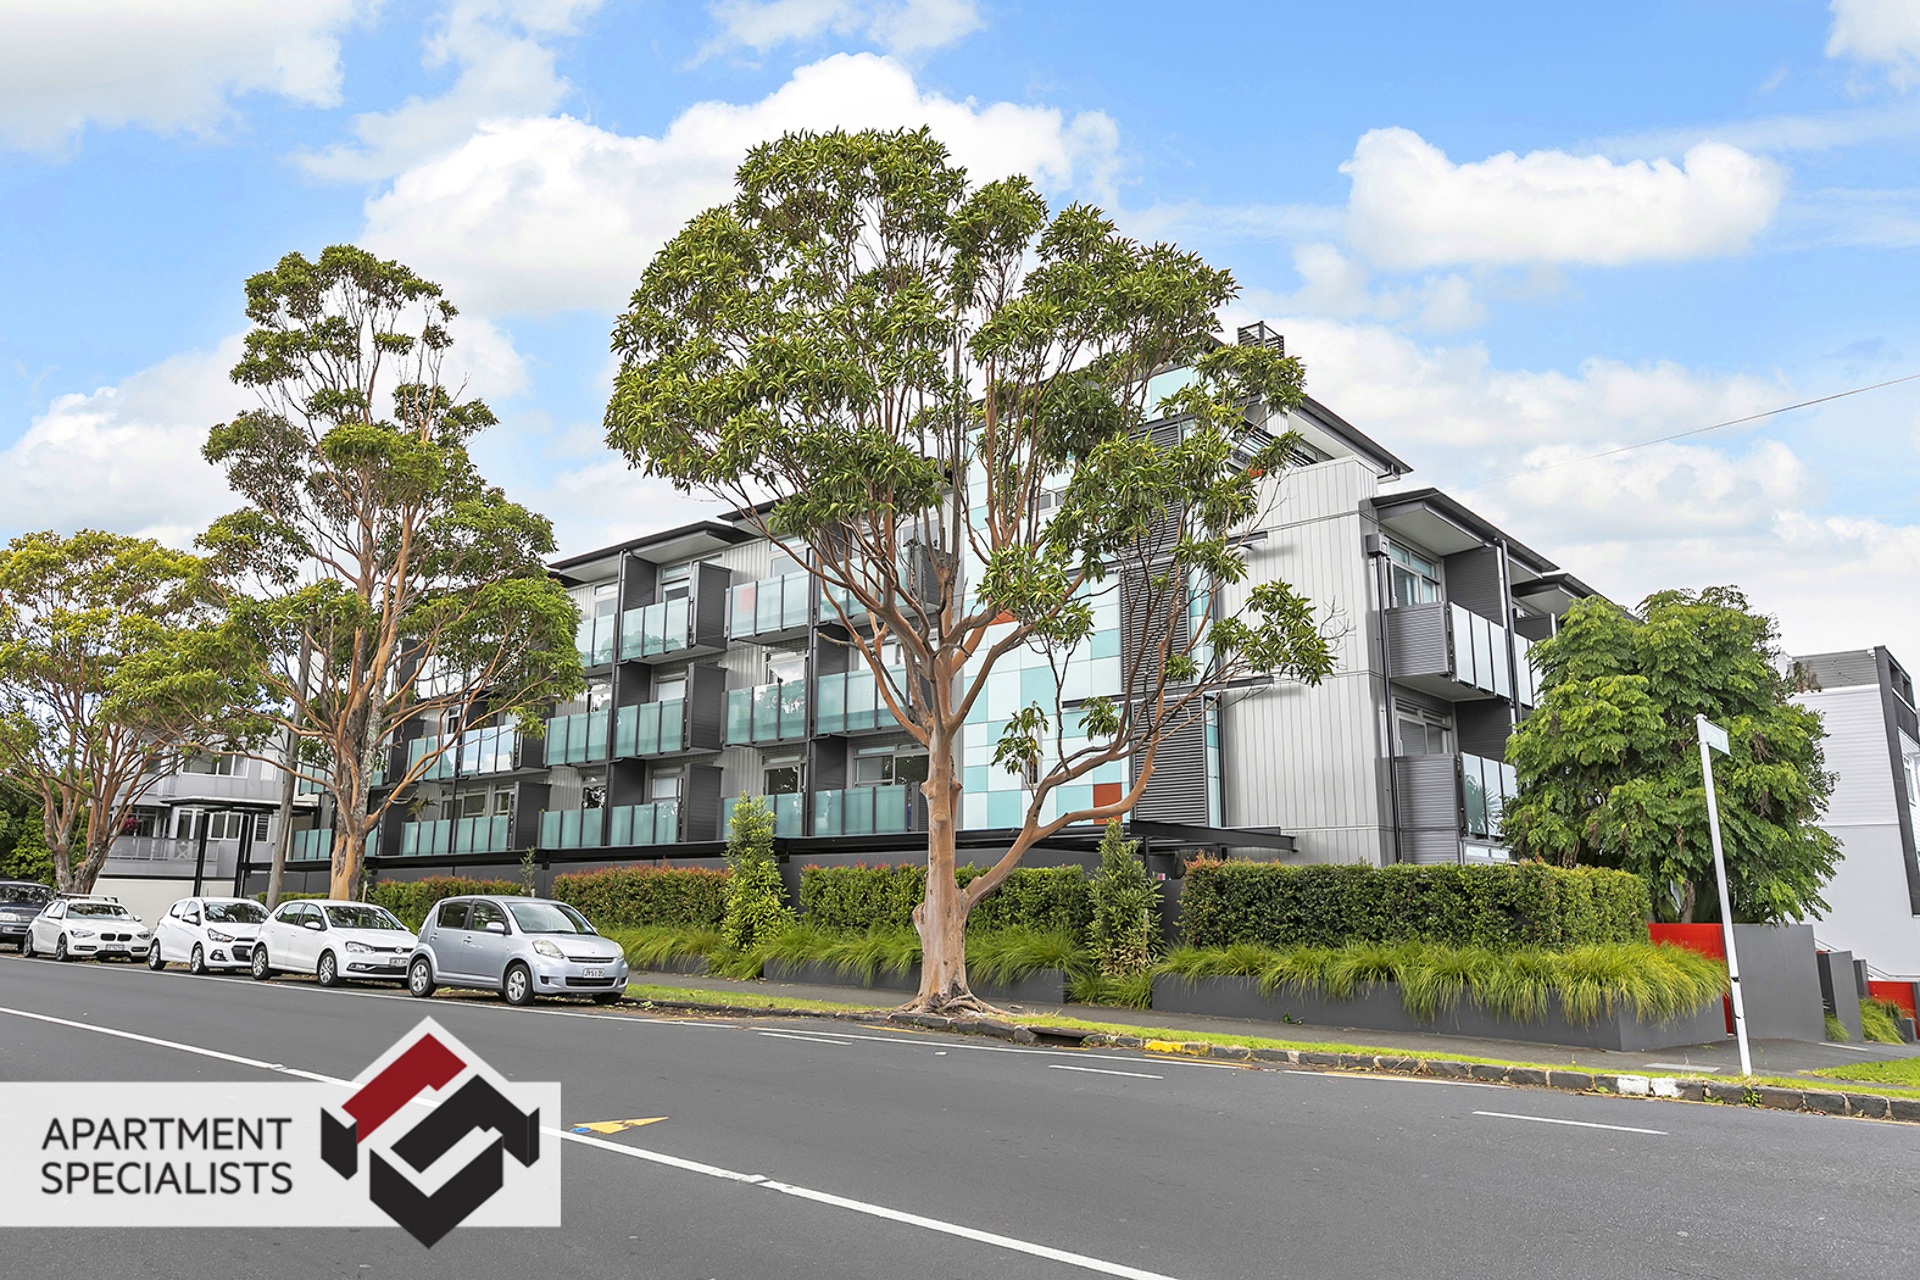 10 | 80 Richmond Road, Ponsonby | Apartment Specialists